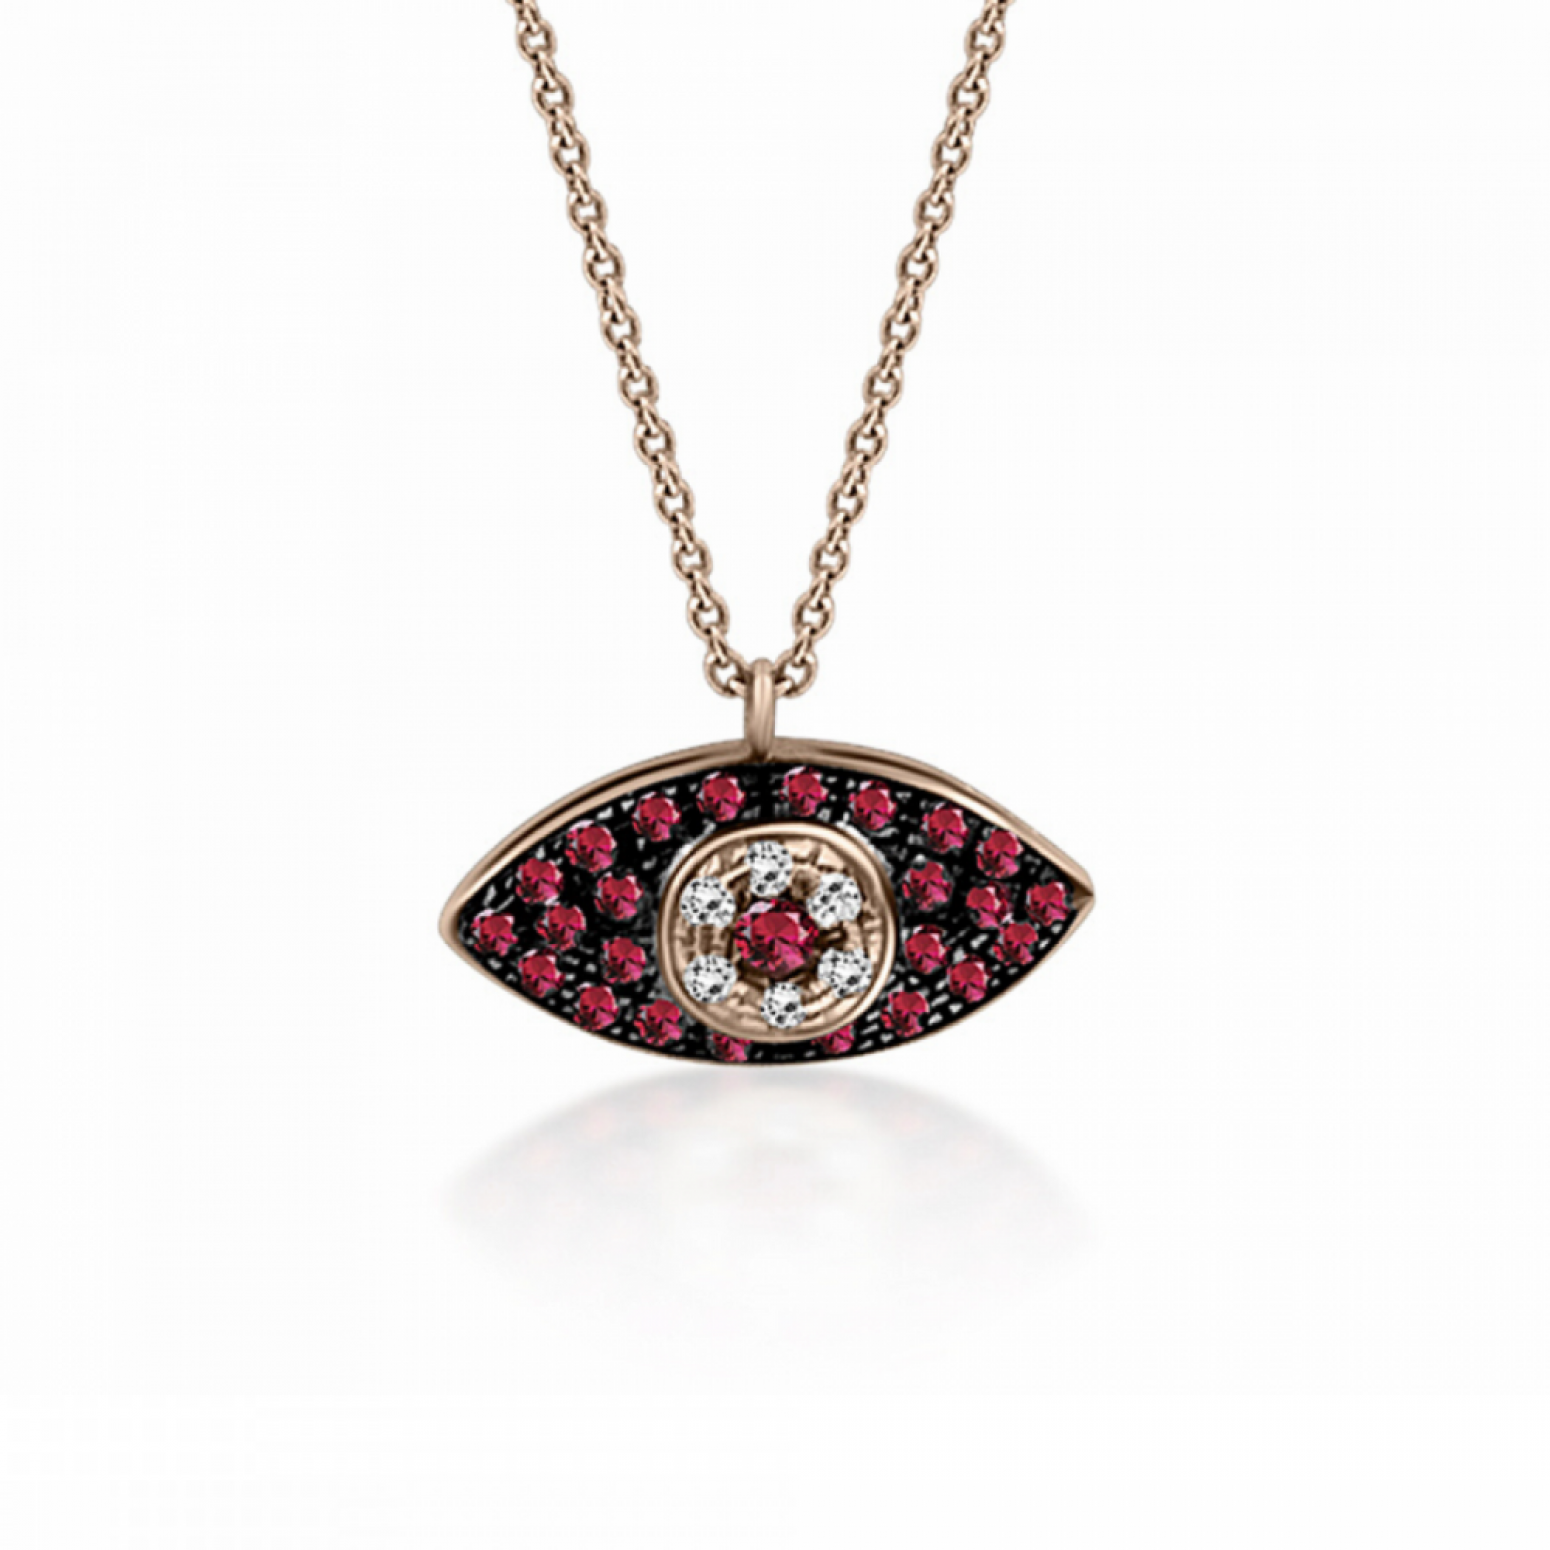 Eye necklace, Κ18 pink gold with rubies 0.20ct and diamonds 0.05ct VS1, H ko5166 NECKLACES Κοσμηματα - chrilia.gr